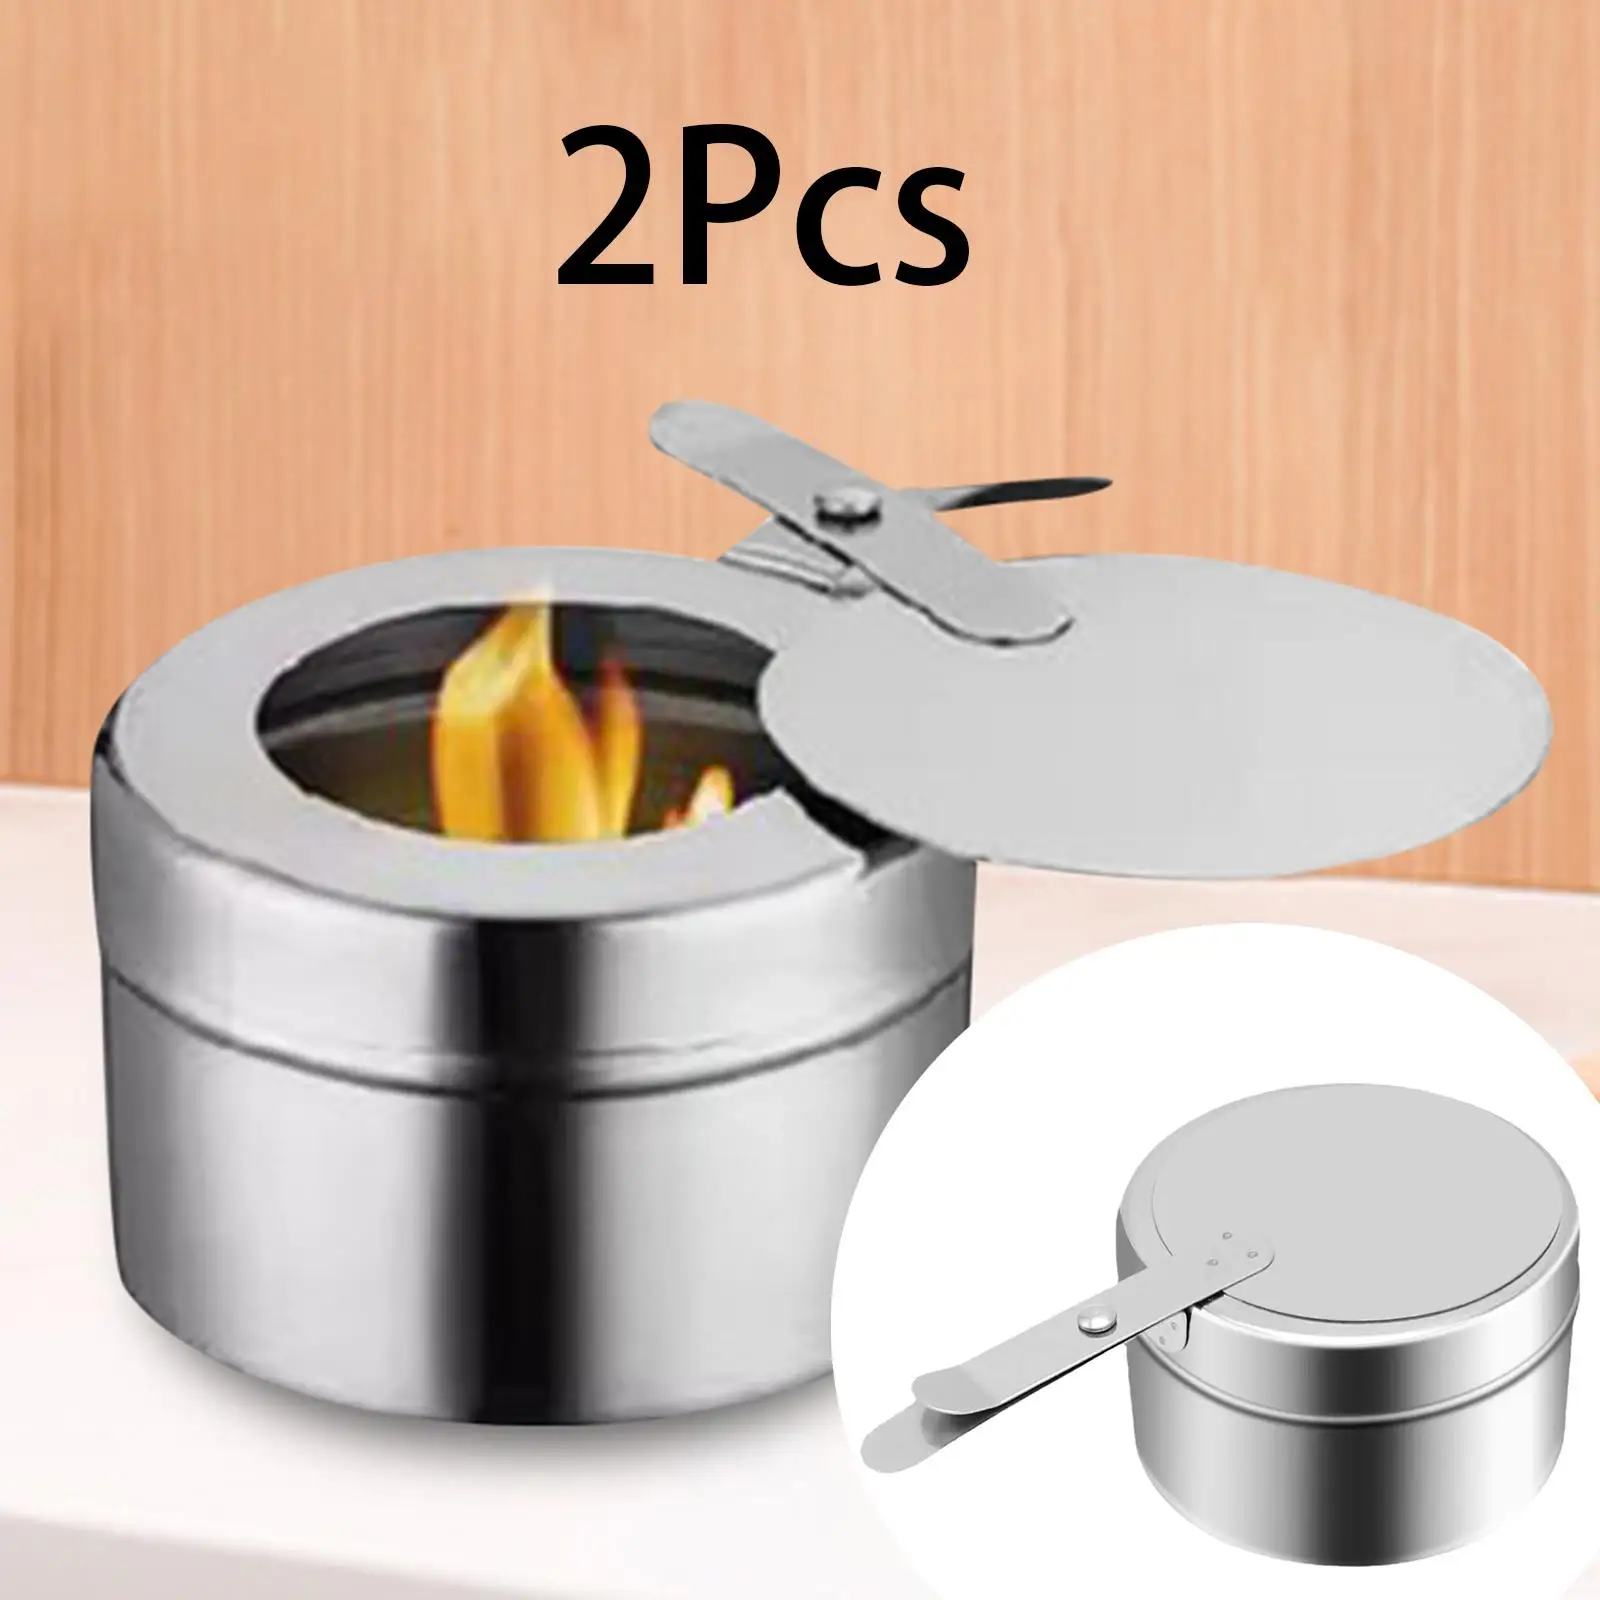 2x Buffet Warmer Warming Trays Heat Fuel Buffet Server Parties Fuel Cans Holder Set for Party Food Warmer Barbecue Buffet Server